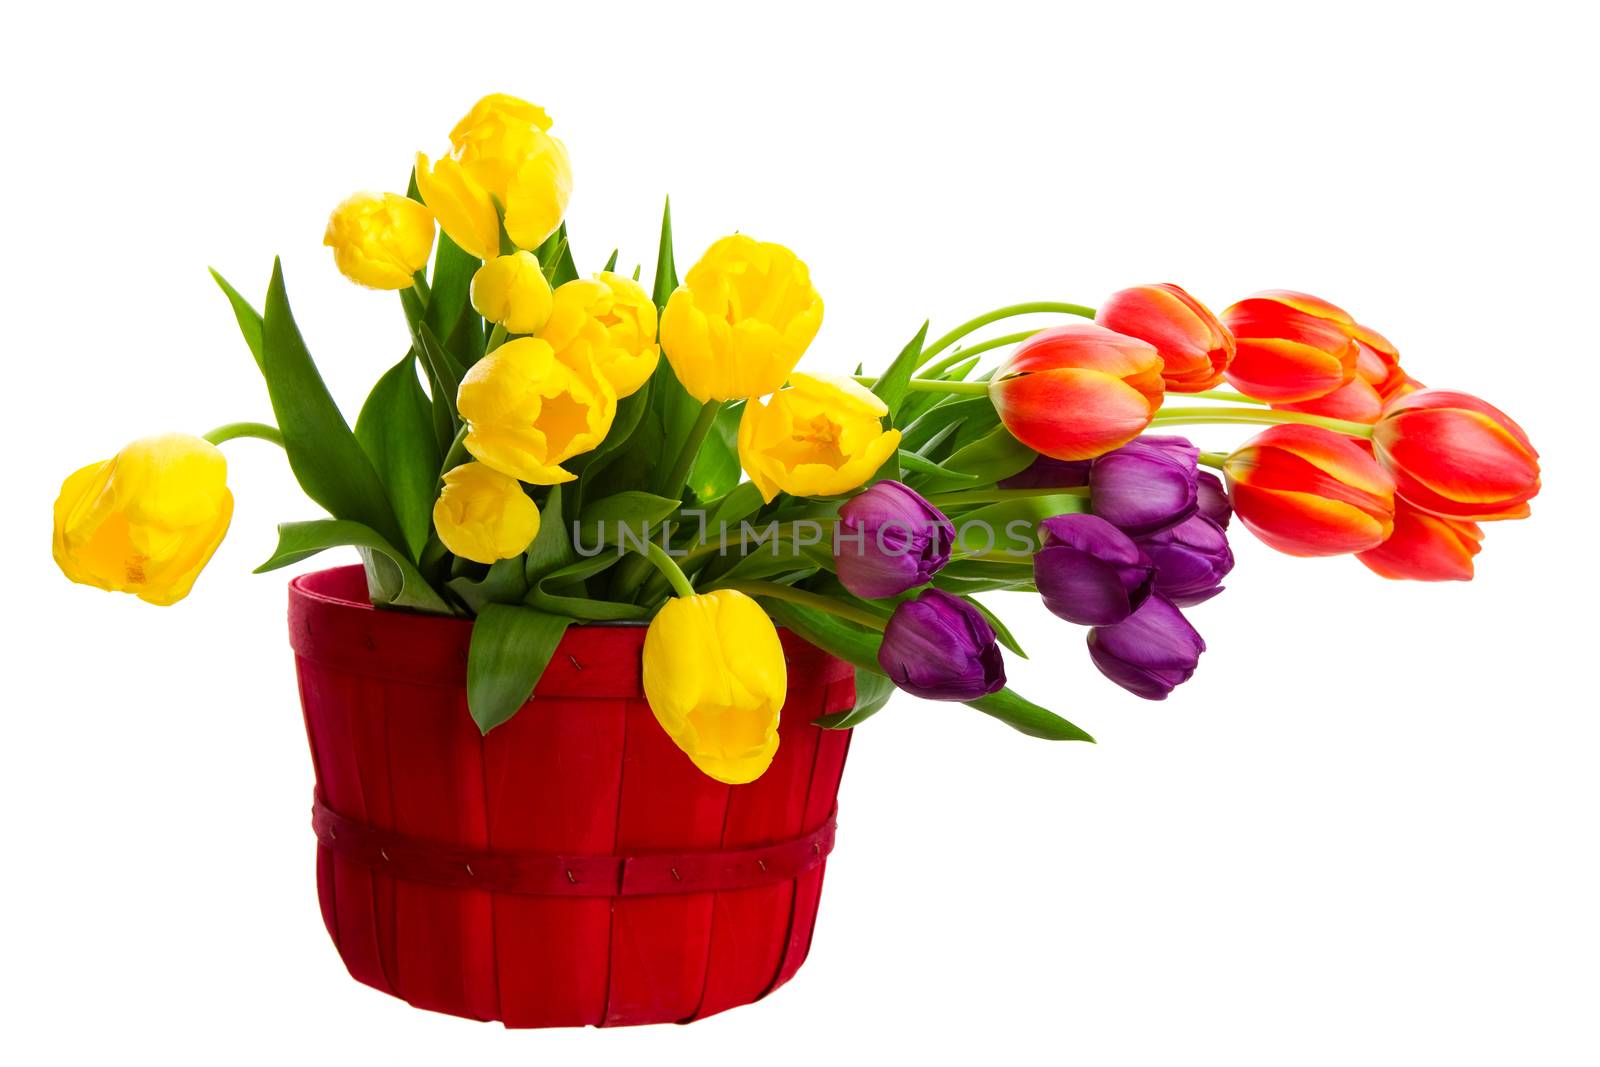 A variety of freshly cut tulips in a bright, red basket.  Shot on white background.